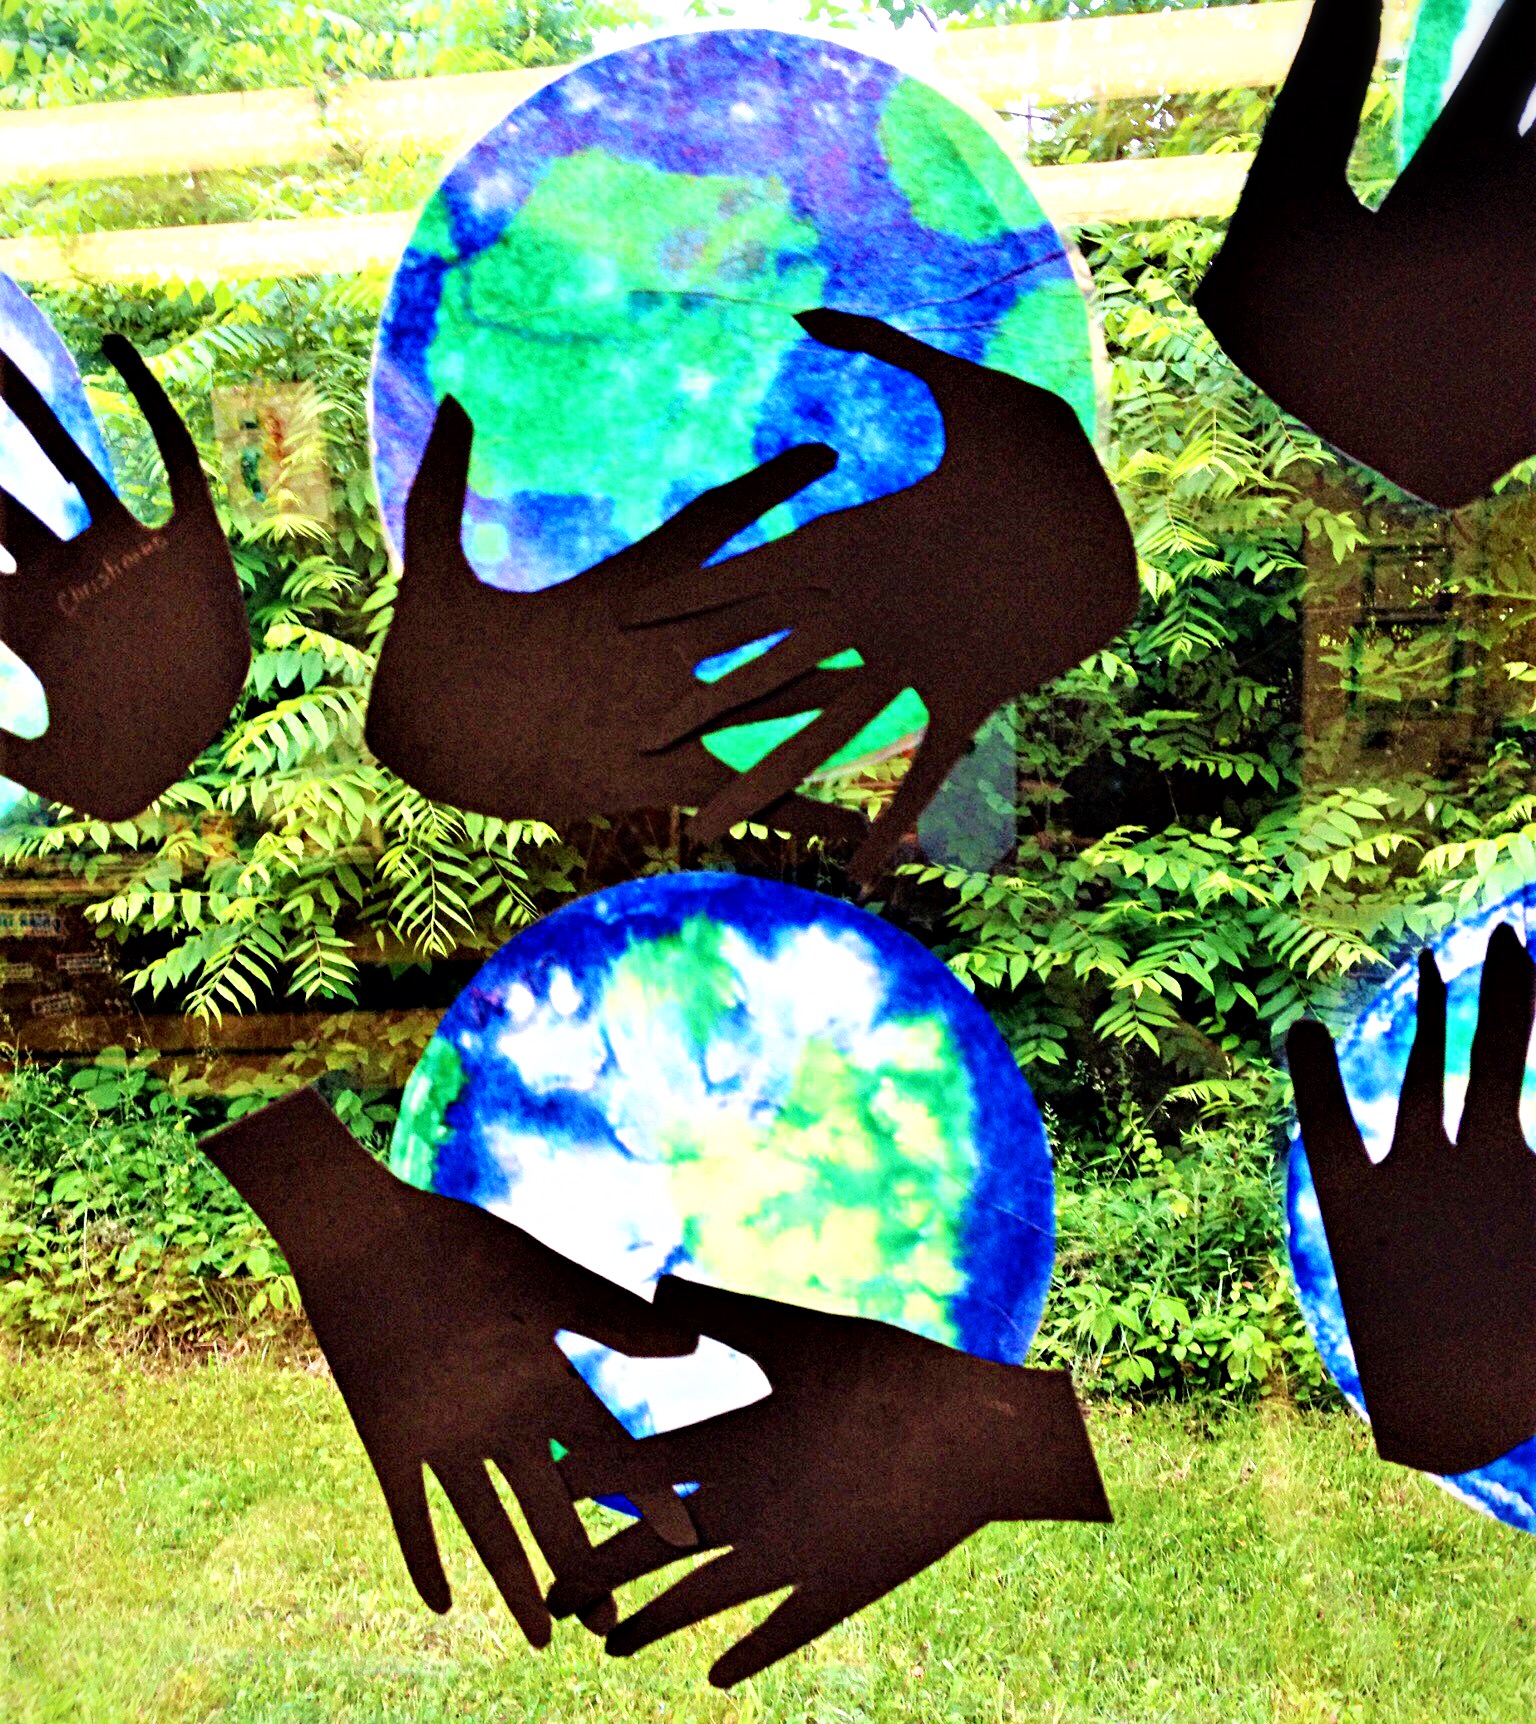 paper cutout hands hold a circle colored blue and green to resemble the Earth